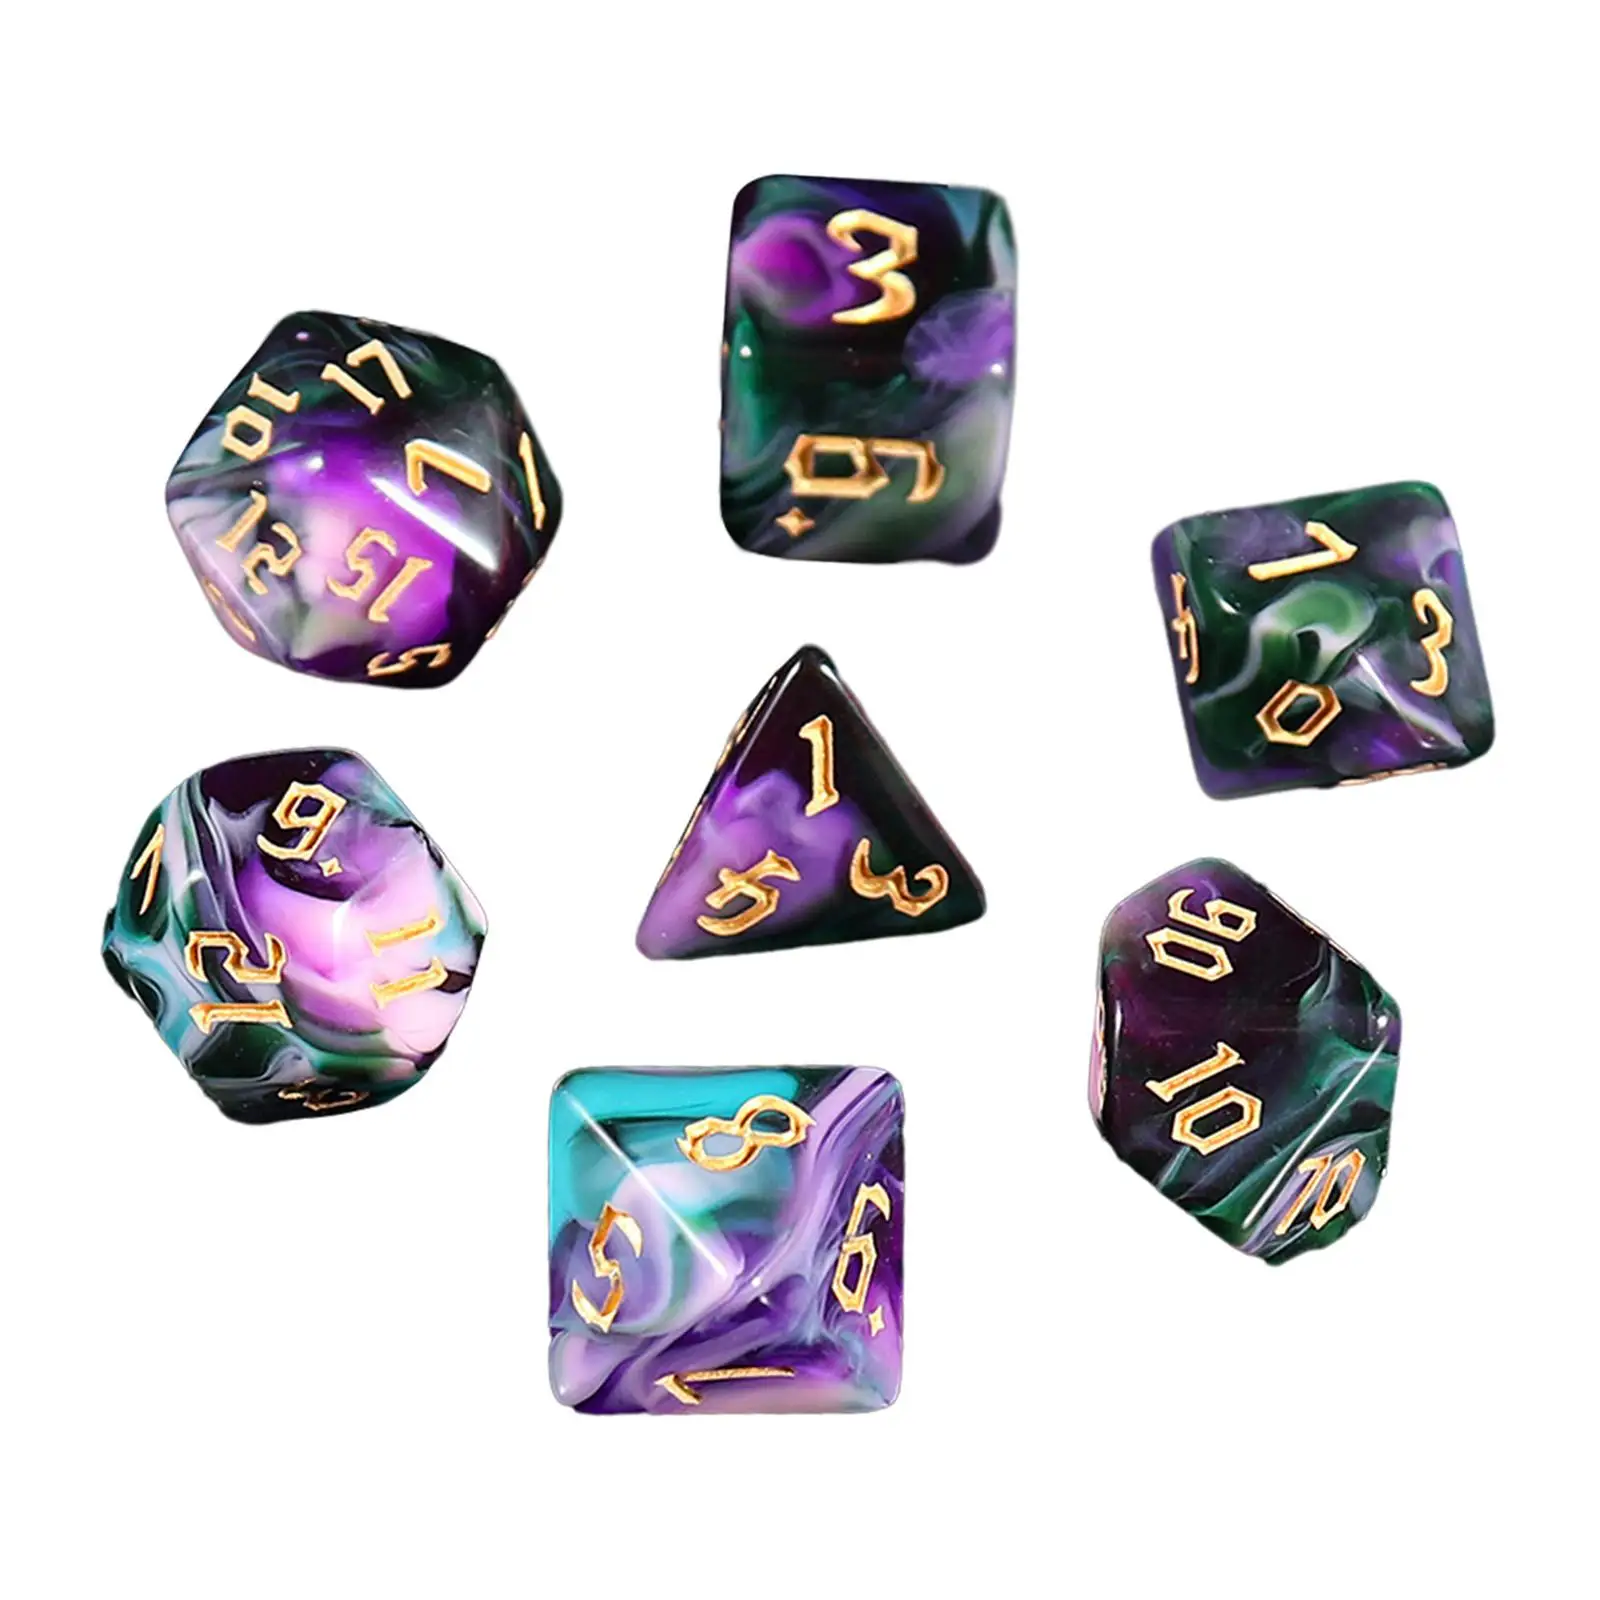 7pcs D4-d20 Acrylic Dice, Polyhedral Dice Set, Multi-Sided Dice for Card Games